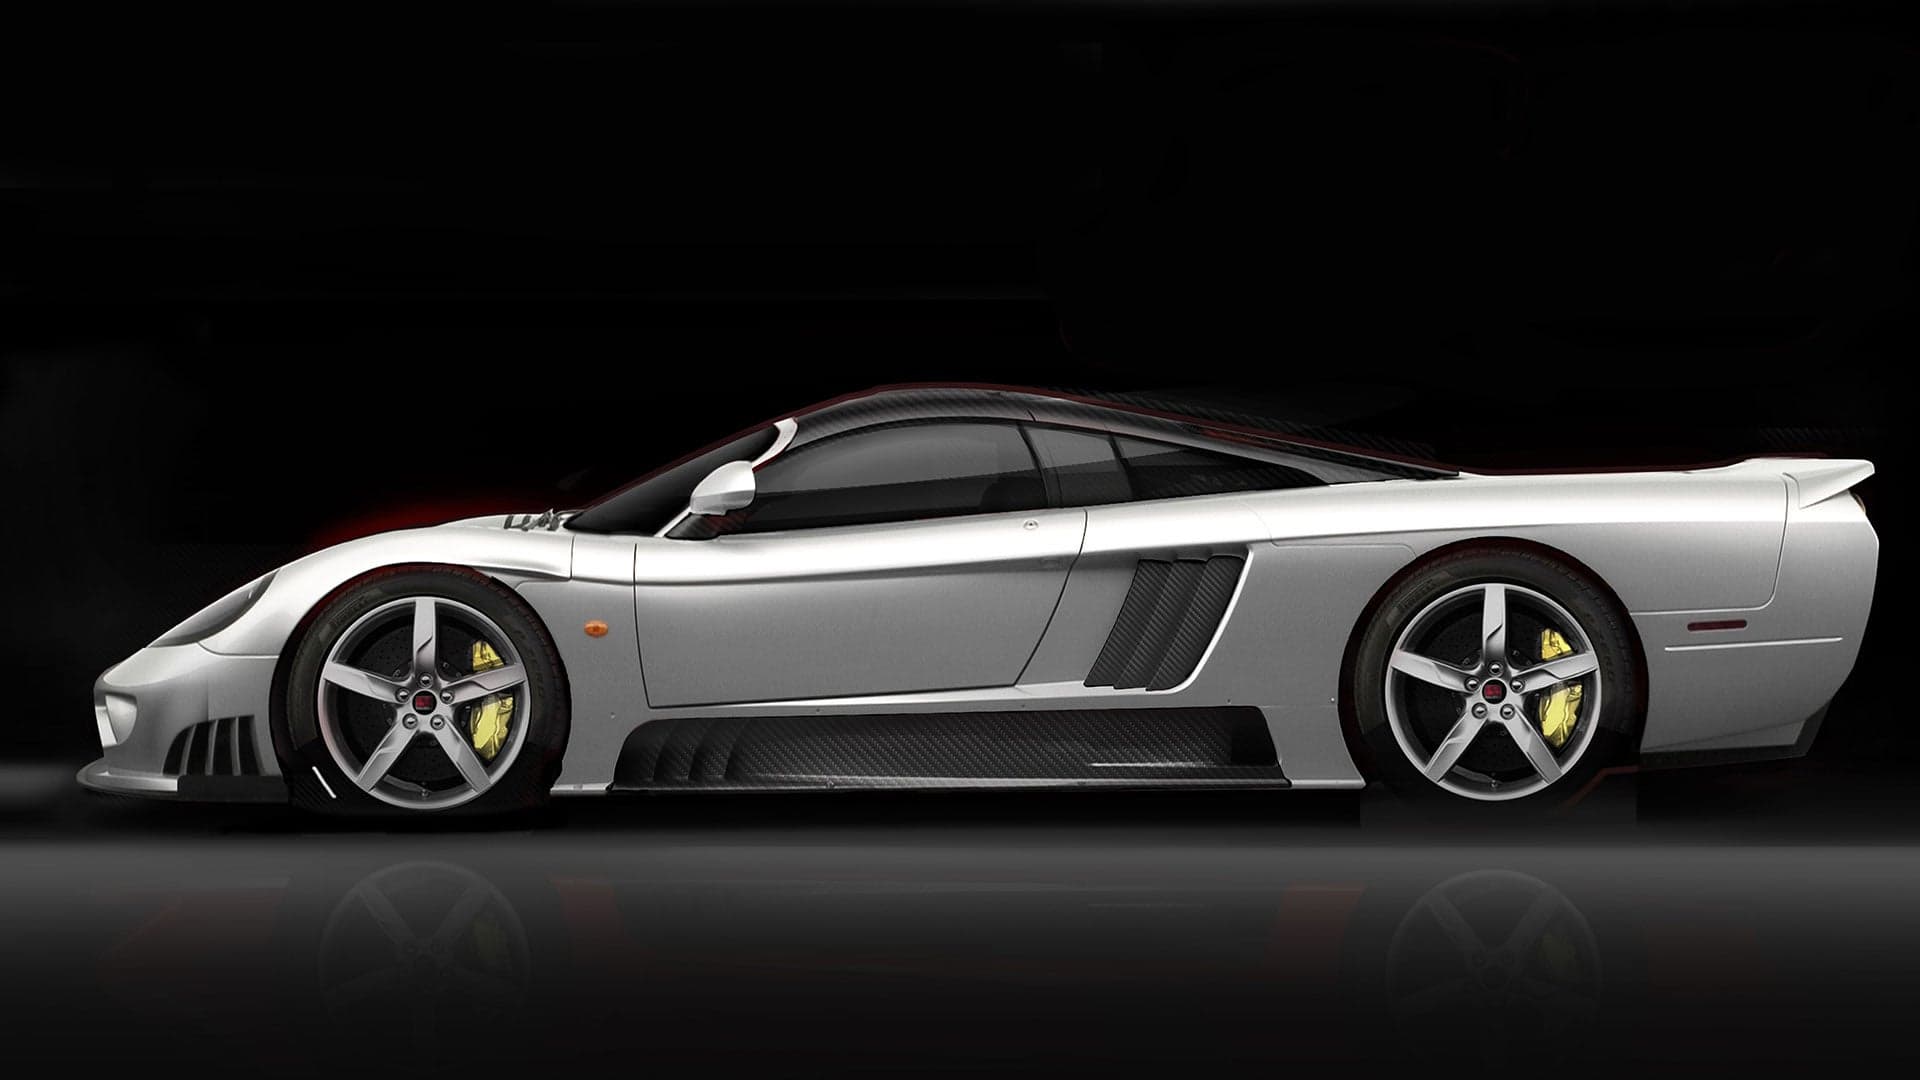 Saleen Building Seven New S7s and Jeep’s New Crossover Captured Undisguised: The Evening Rush